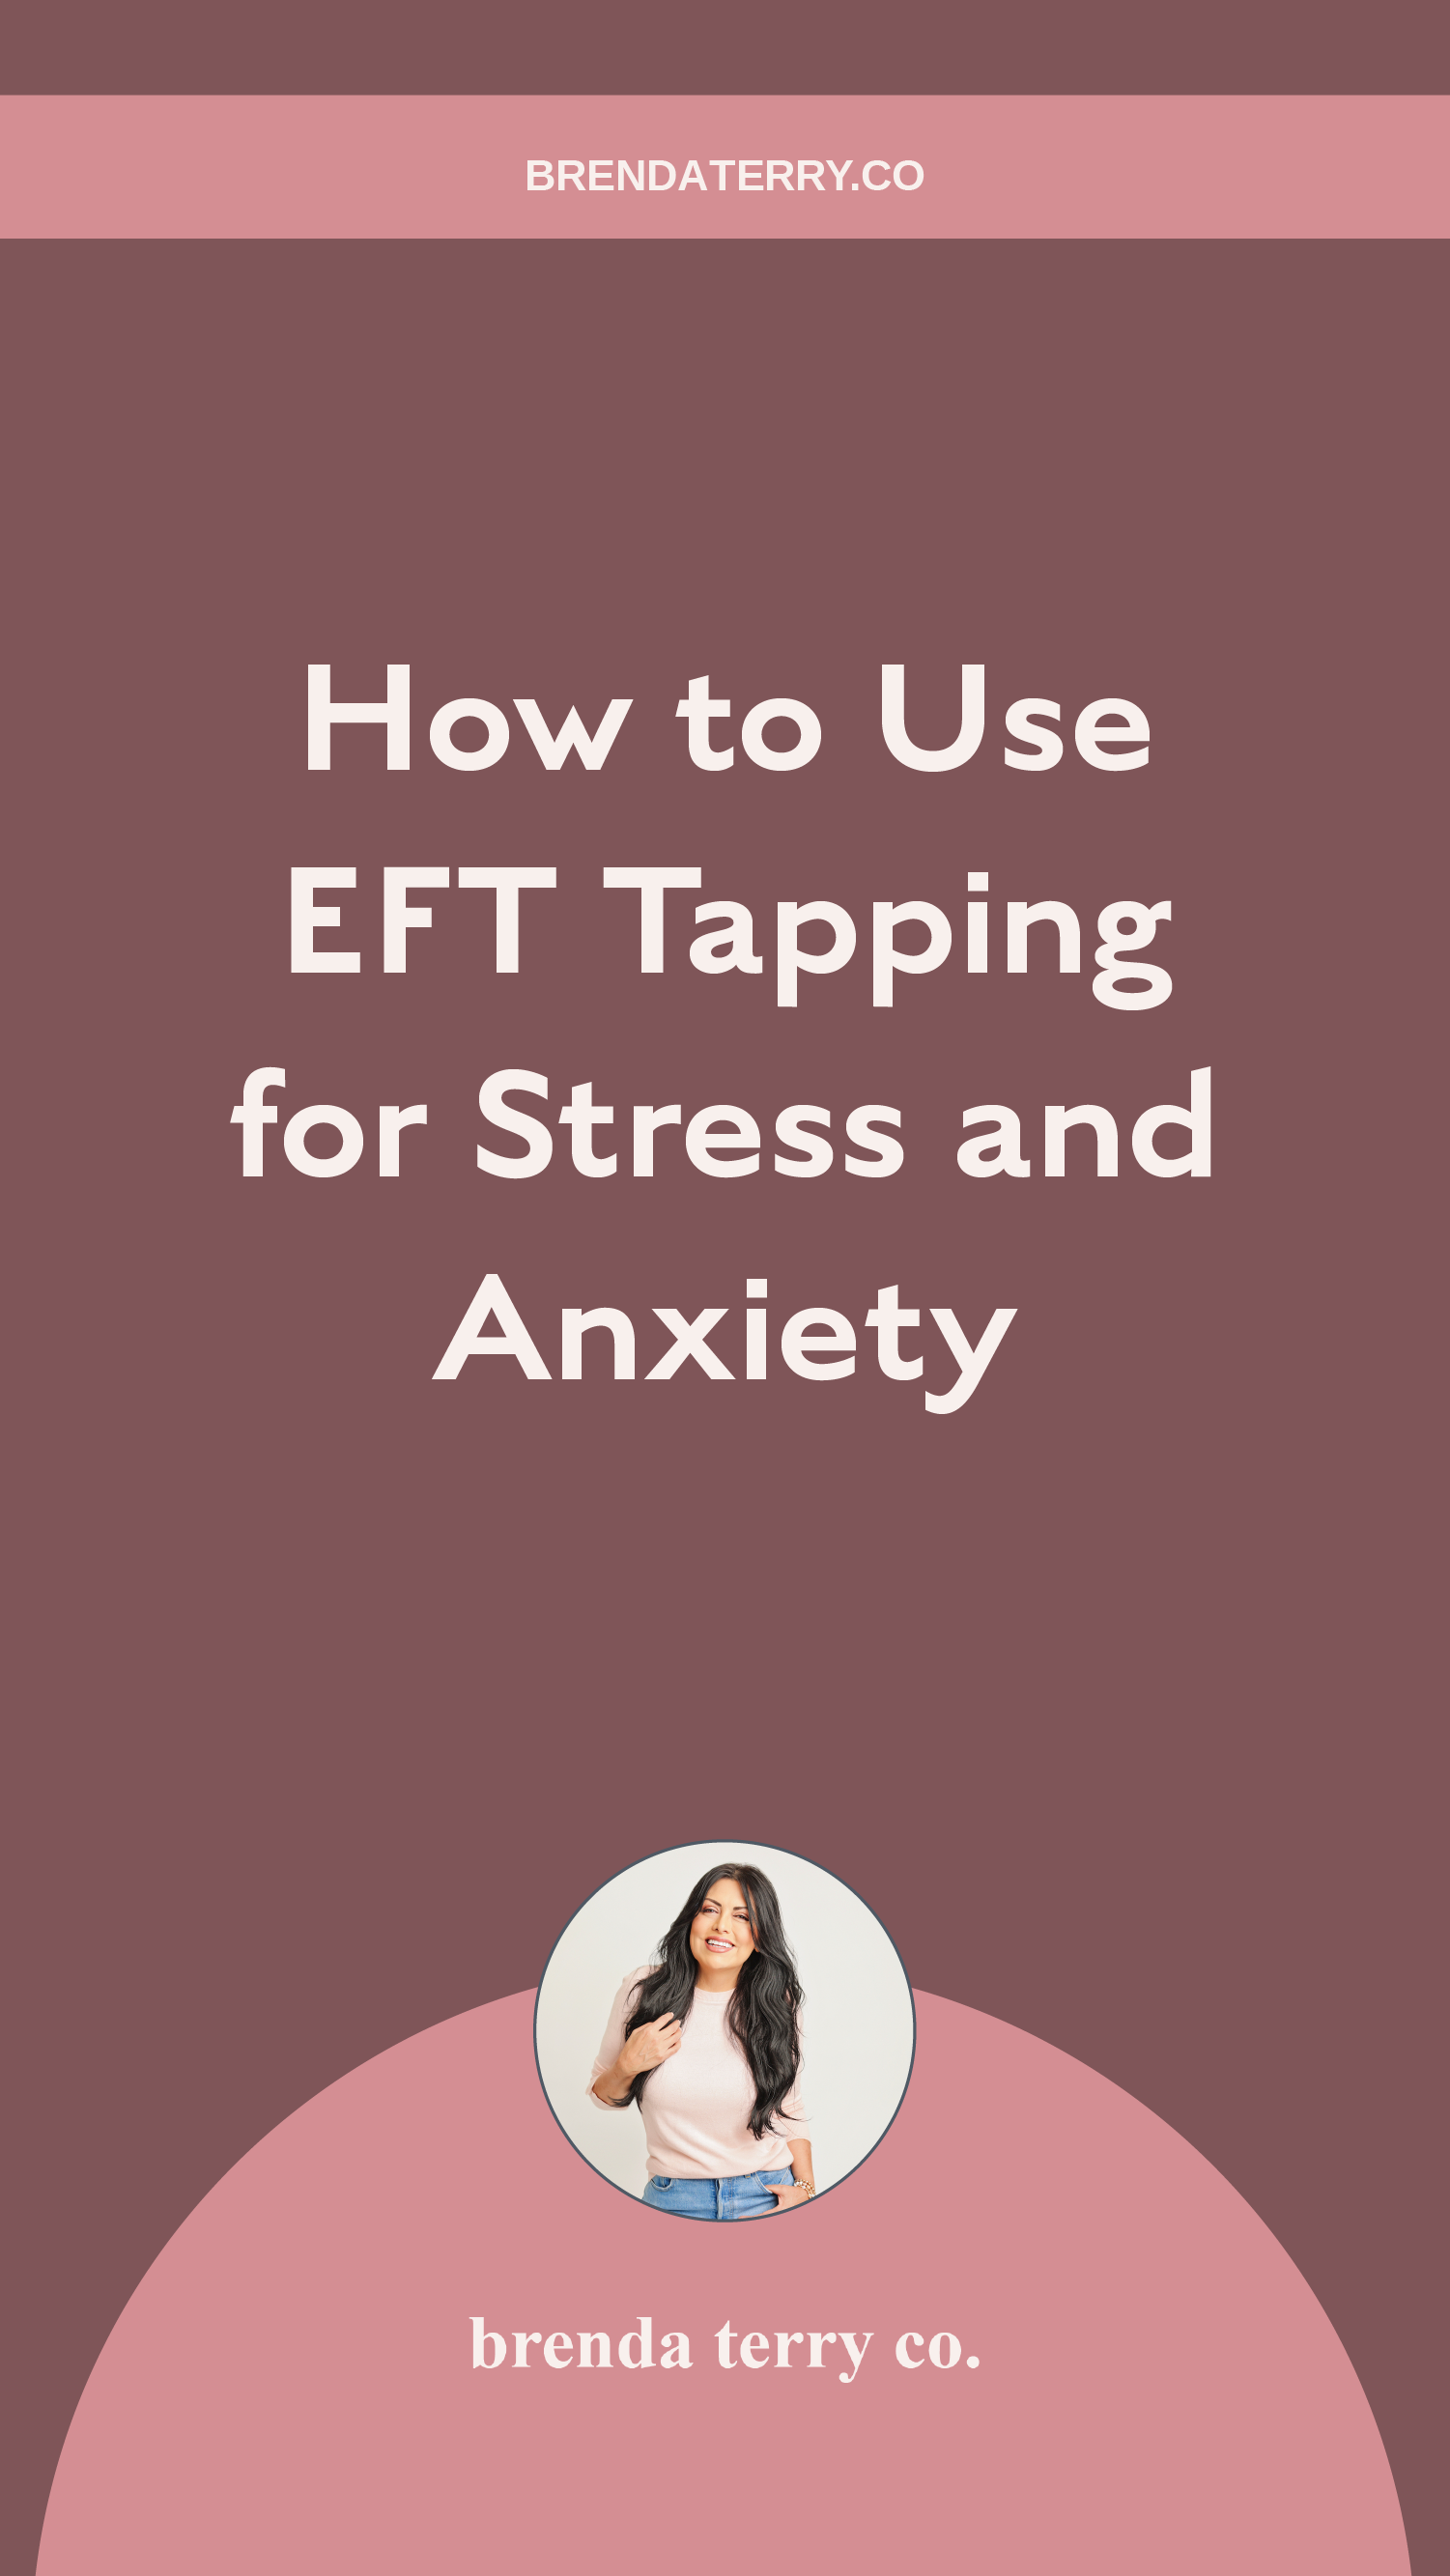 How to Use EFT Tapping for Stress and Anxiety